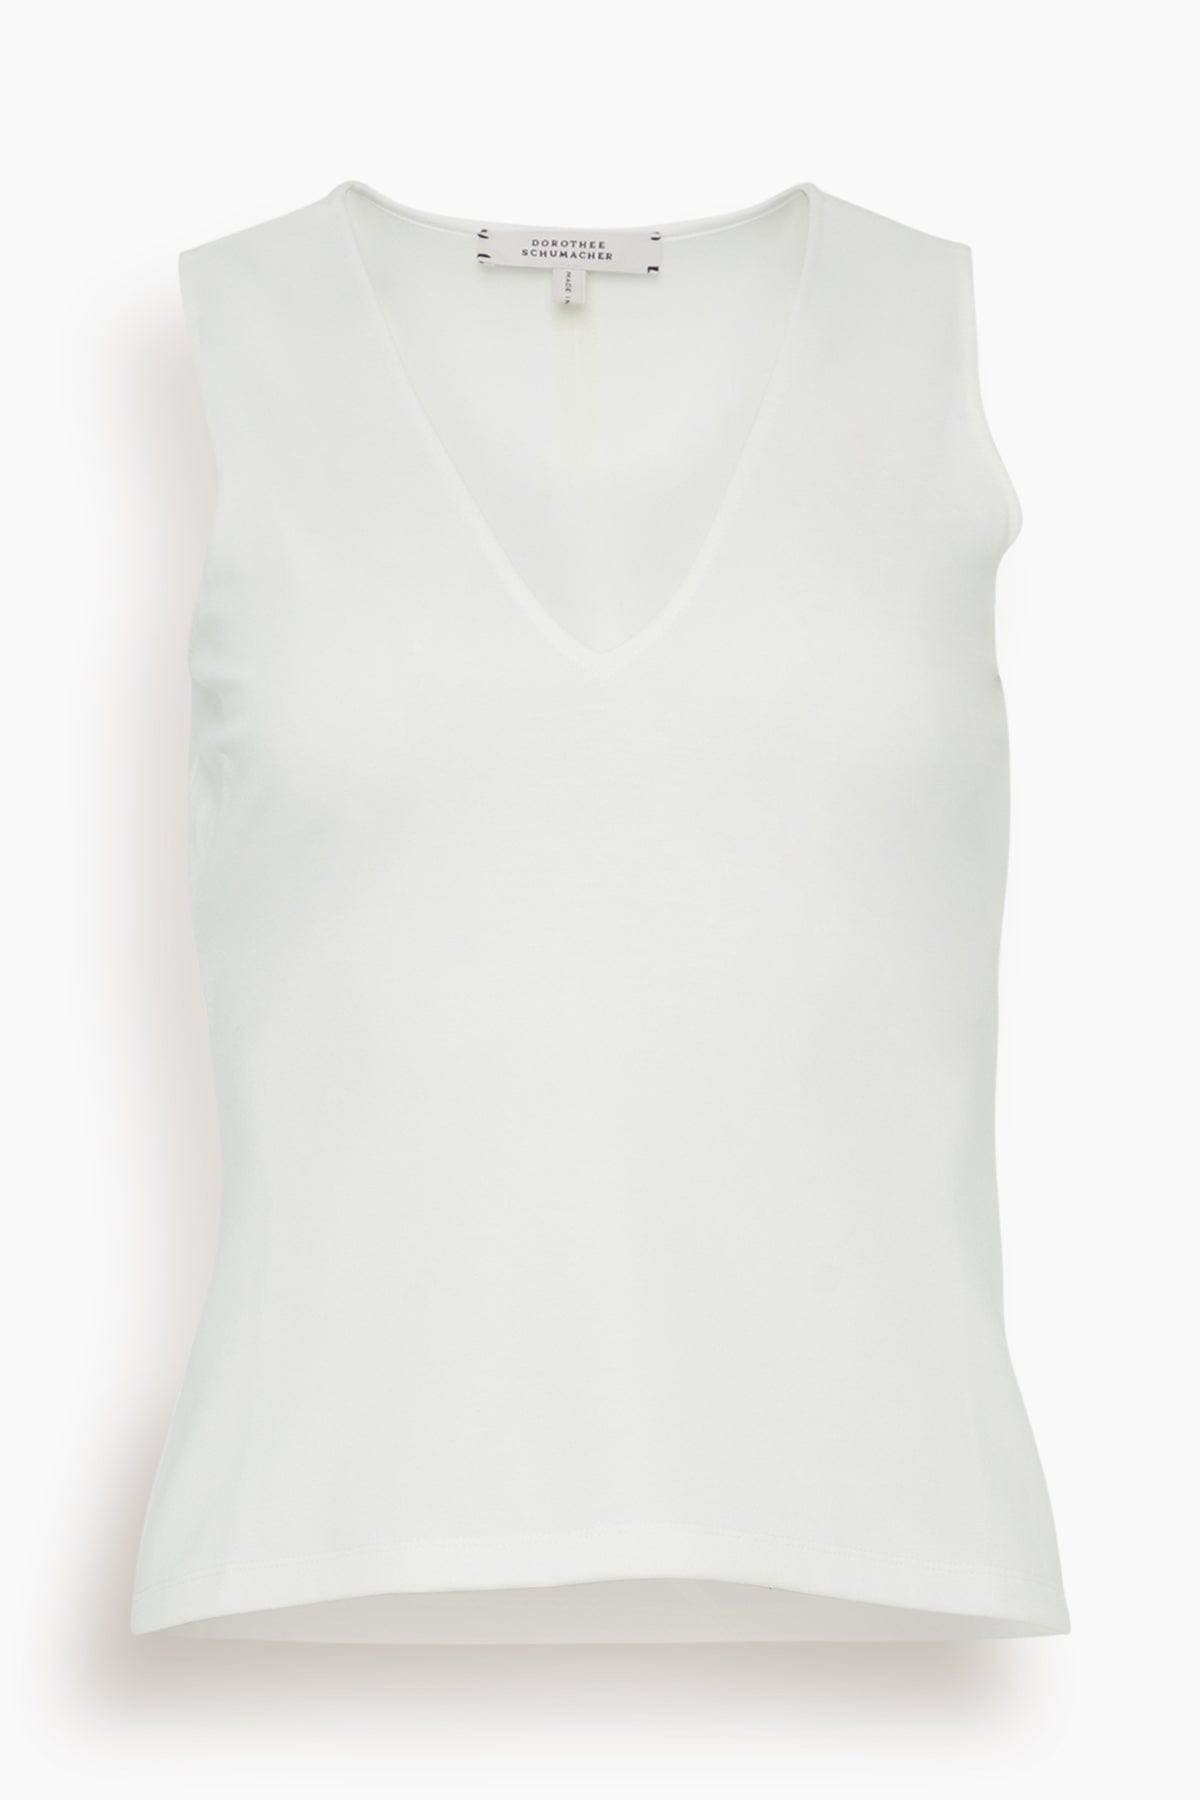 Emotional Essence Top in Camellia White - 1